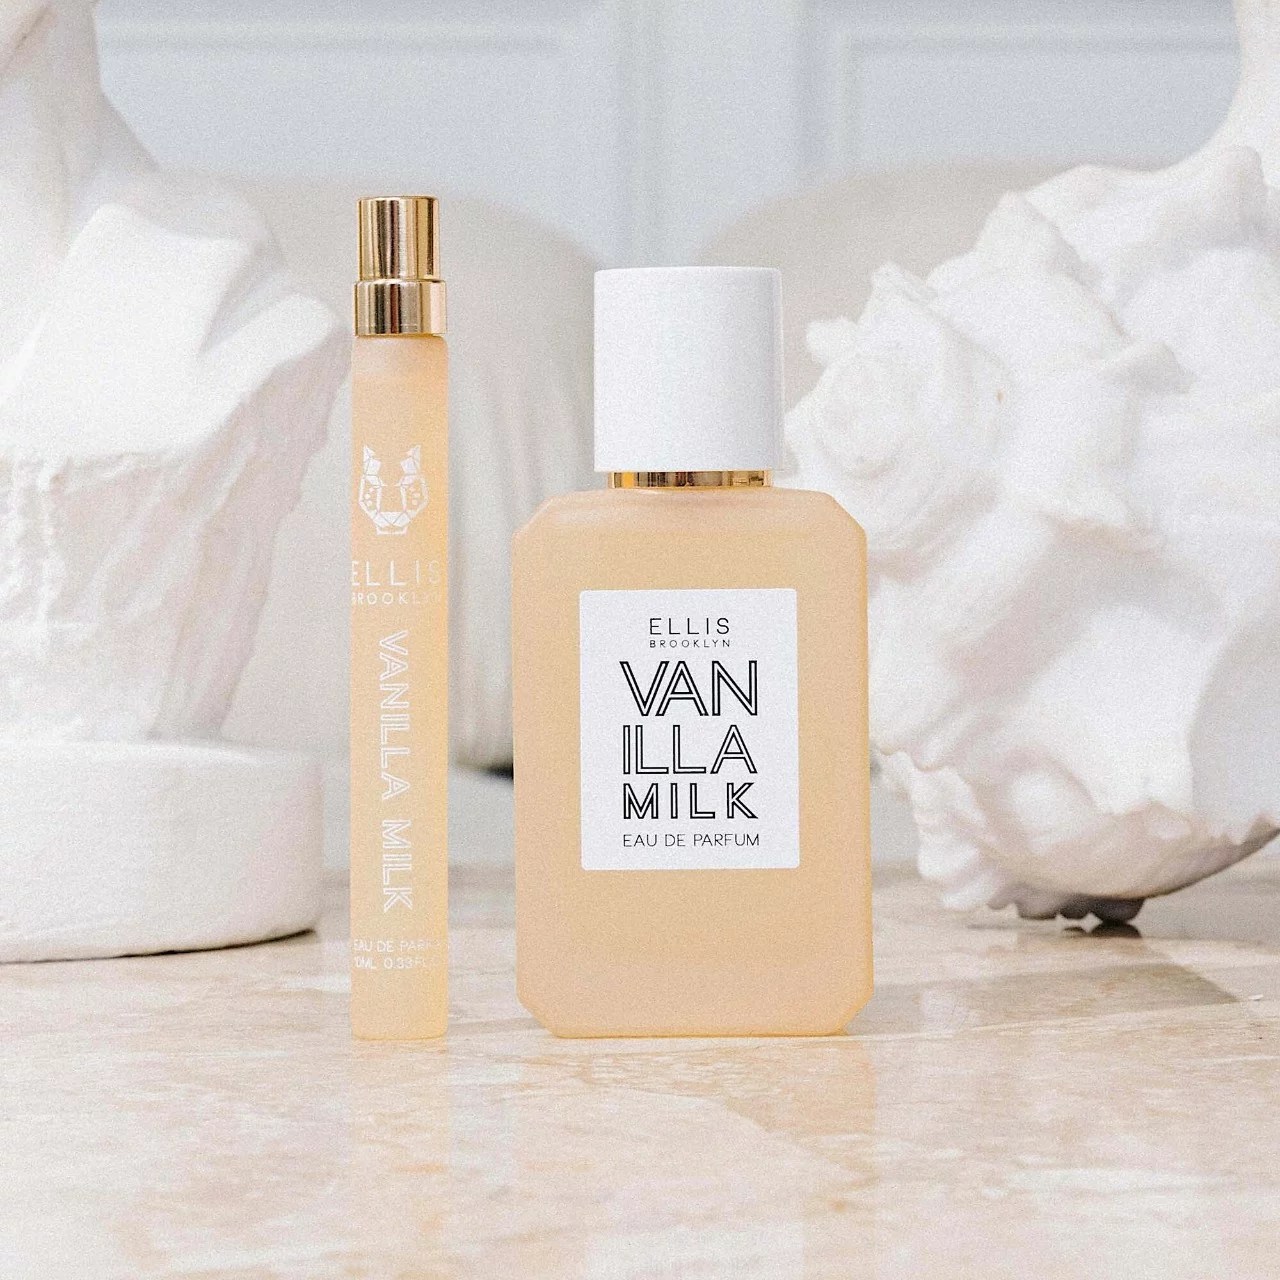 Finally, A Vanilla Scent That Won't Give You a Headache